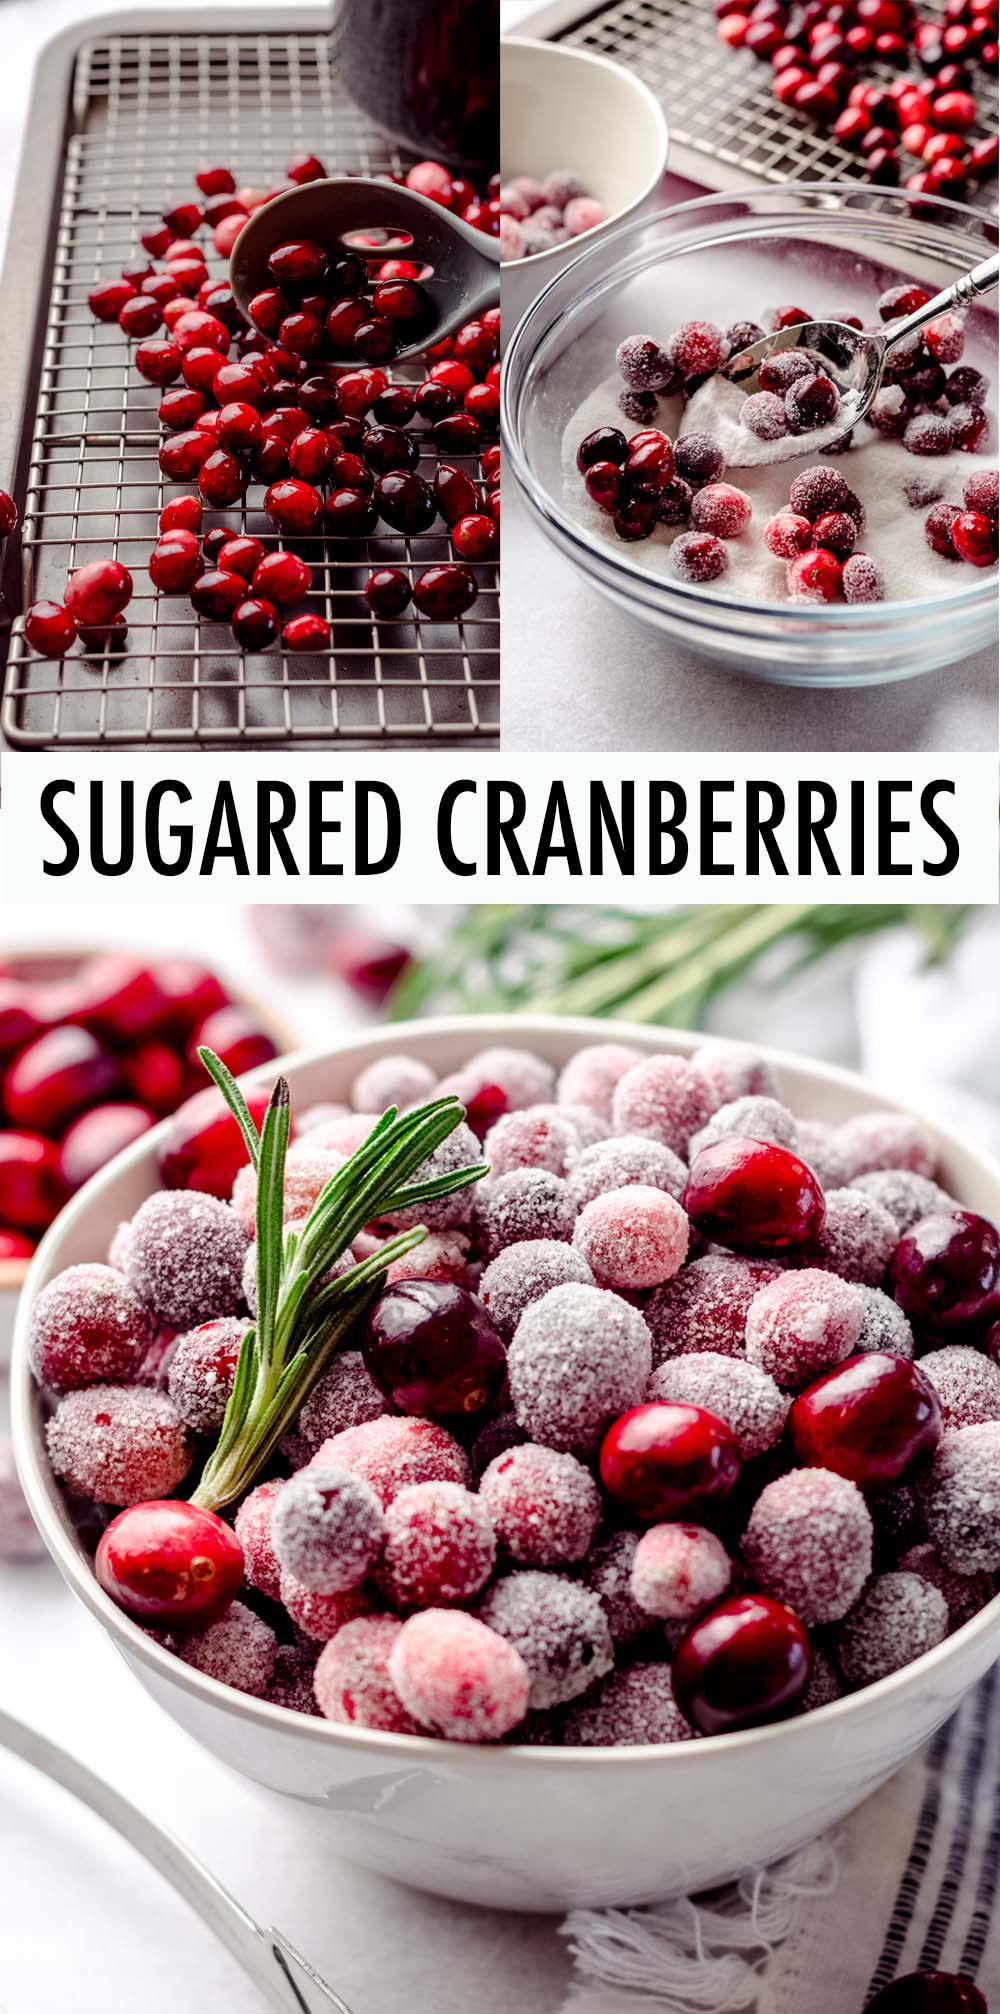 Sugared cranberries, also known as candied cranberries, are the perfect addition to any holiday spread. Use them as a beautiful garnish on pies, tarts, cakes, or cupcakes or use them in holiday cocktails. They're also delicious as a standalone option as a snack and make a great addition to charcuterie or cheese boards. via @frshaprilflours